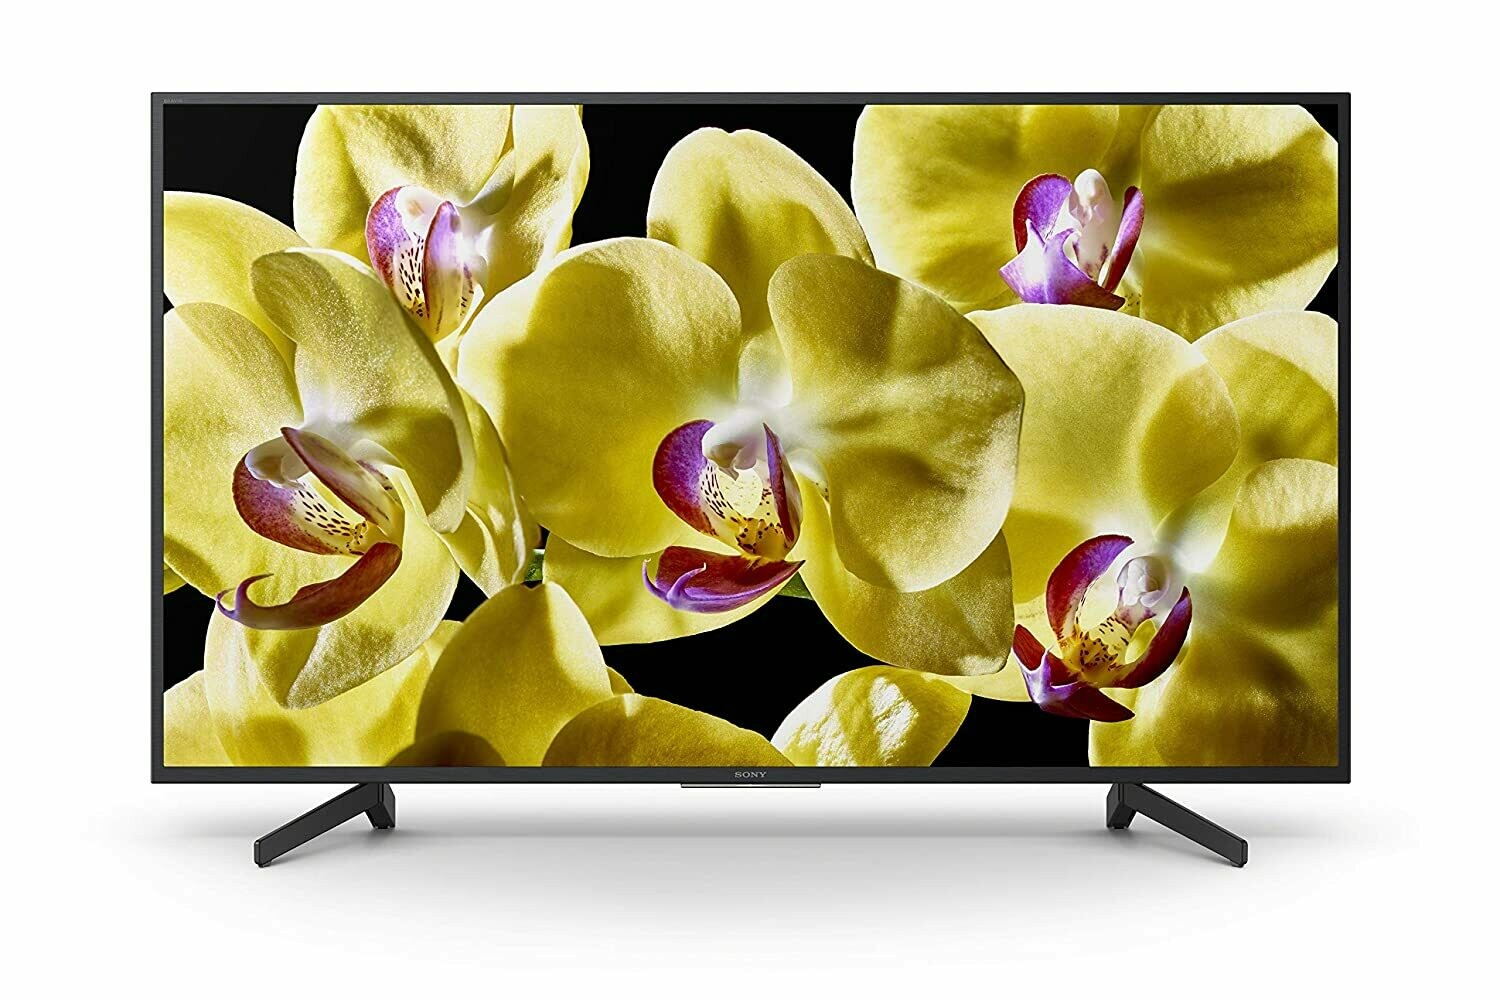 Sony Bravia 138.8 cm (55 inches) 4K Ultra HD Smart Certified Android LED TV KD-55X8000G